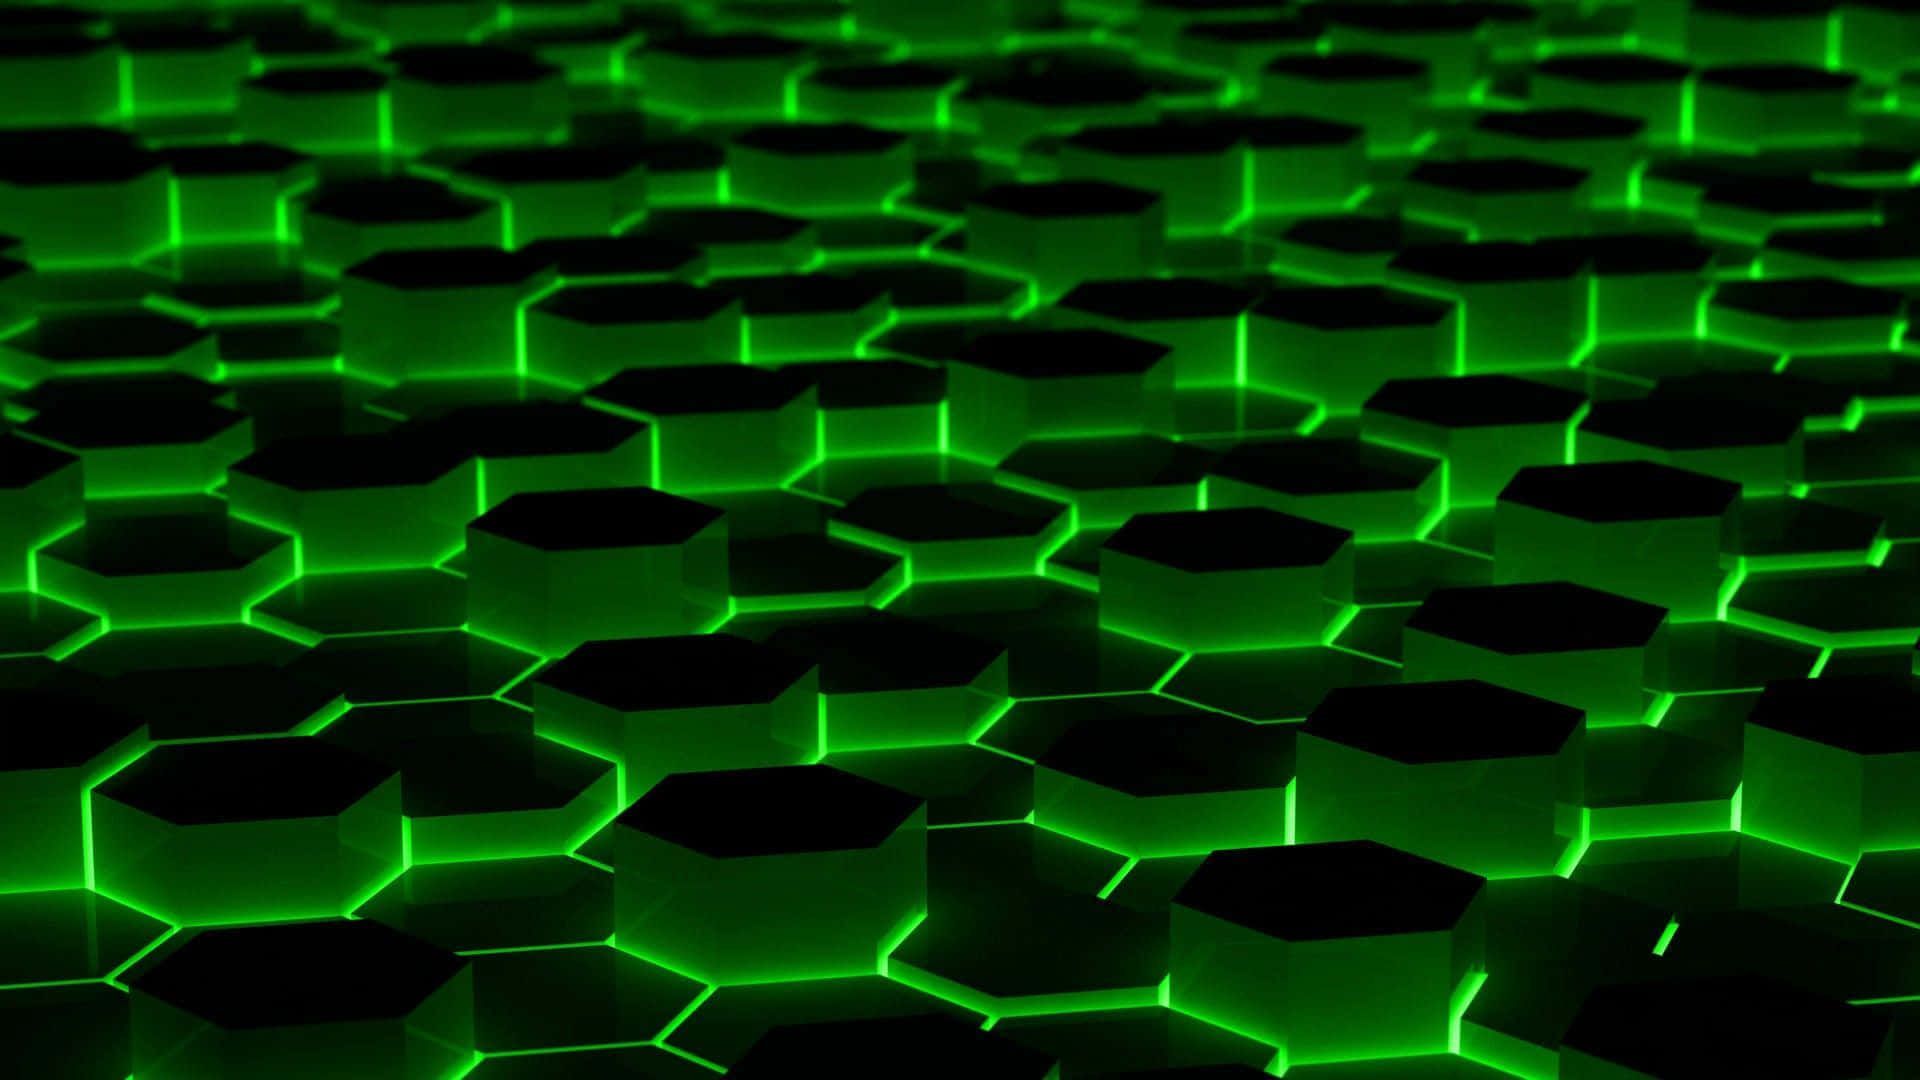 Green hexagons on a black background - Neon green, lime green